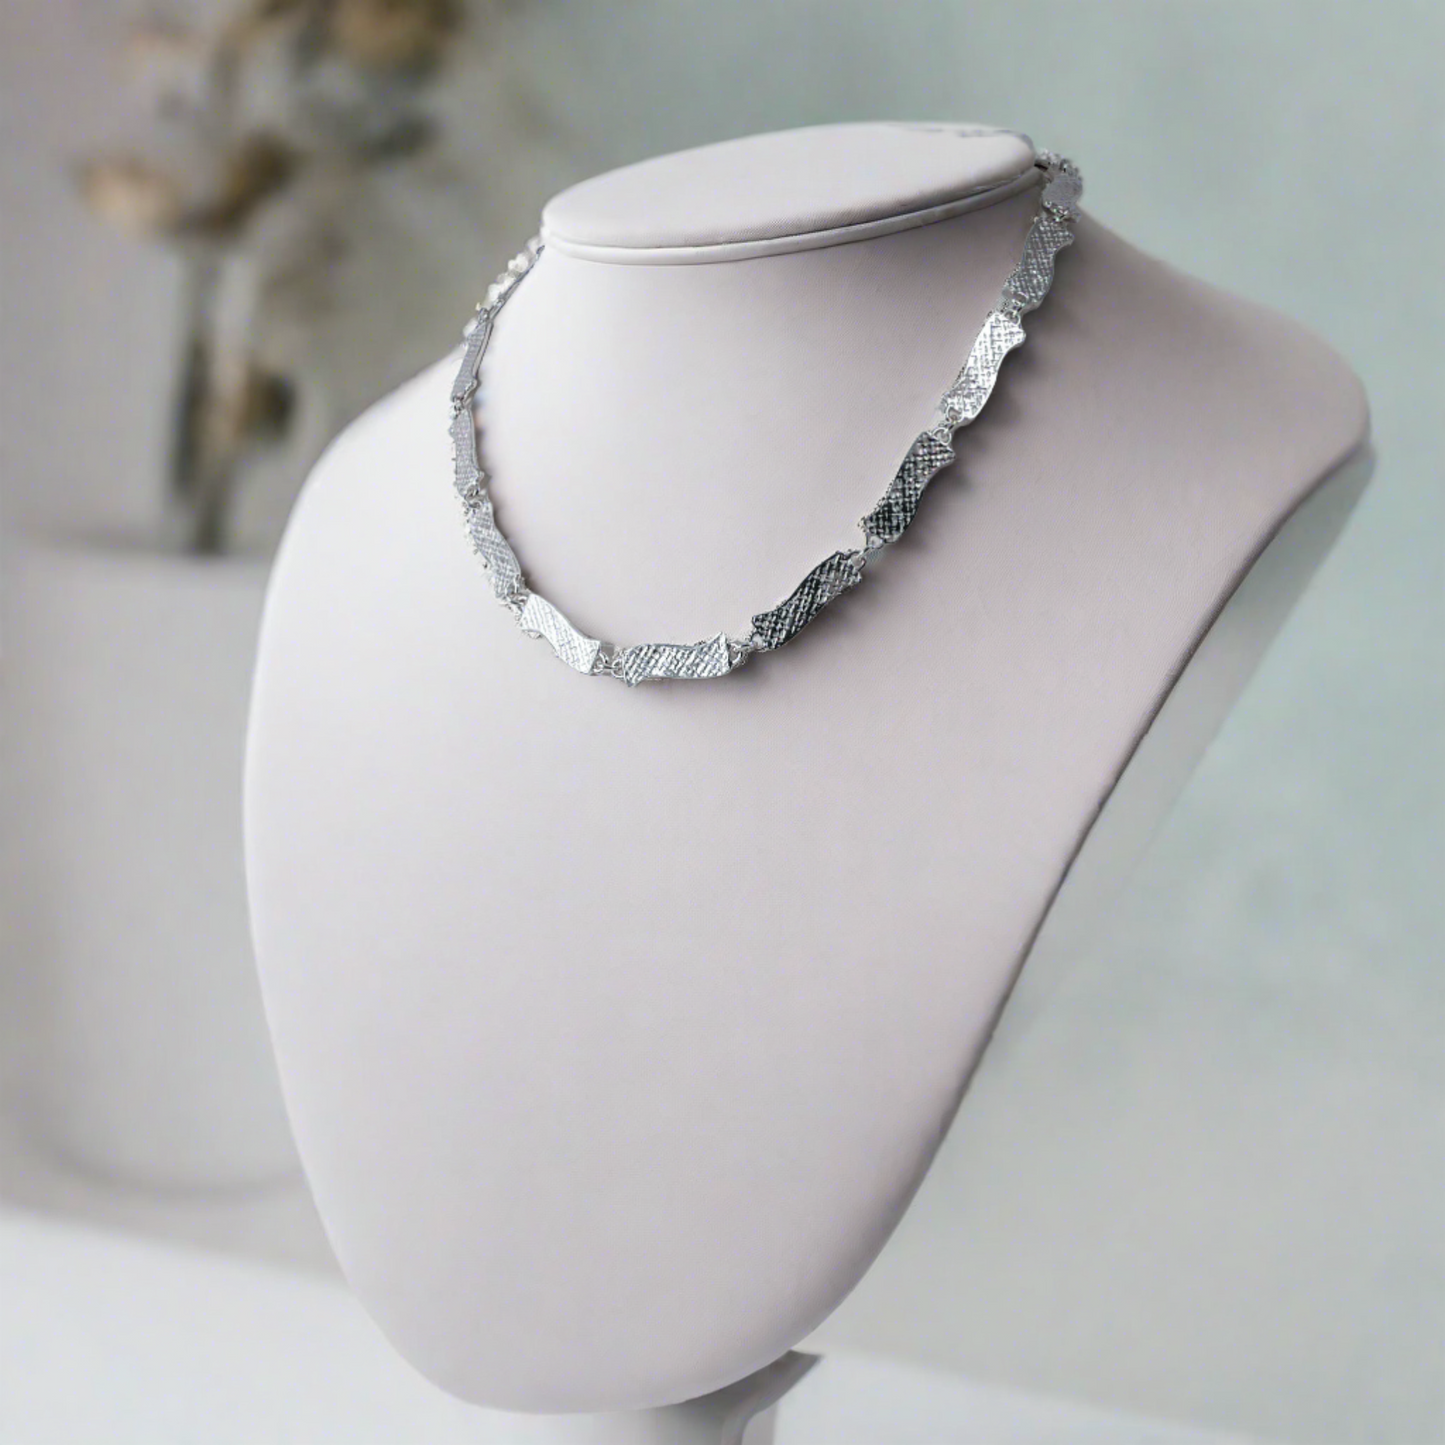 Handmade sterling silver necklace- Waves